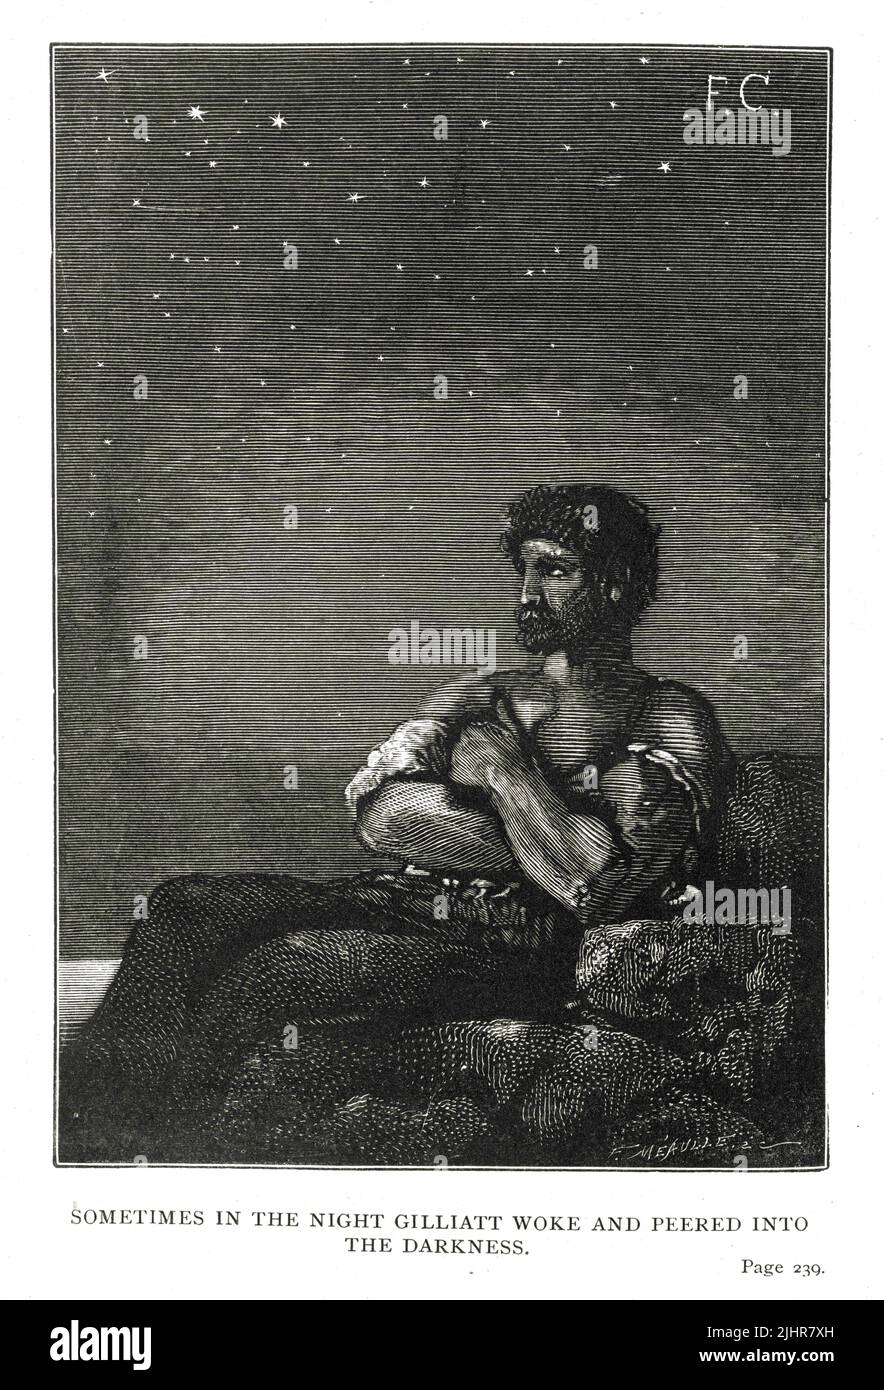 Gilliatt's loneliness: 'Sometimes in the night-time Gilliatt woke and peered into the darkness. He felt a strange emotion. His eyes were opened upon the black night ; the situation was dismal ; full of disquietude.' Second part, Book II, chapter V.  Illustration from a set of 56 engravings published in the English edition of 'Les Travailleurs de la Mer' ('Toilers of the Sea'), by Victor Hugo, published in 1869 by Sampson Low, Son and Marston.  Illustrator: François-Nicolas Chifflart. Engraver: Fortuné Méaulle. Stock Photo